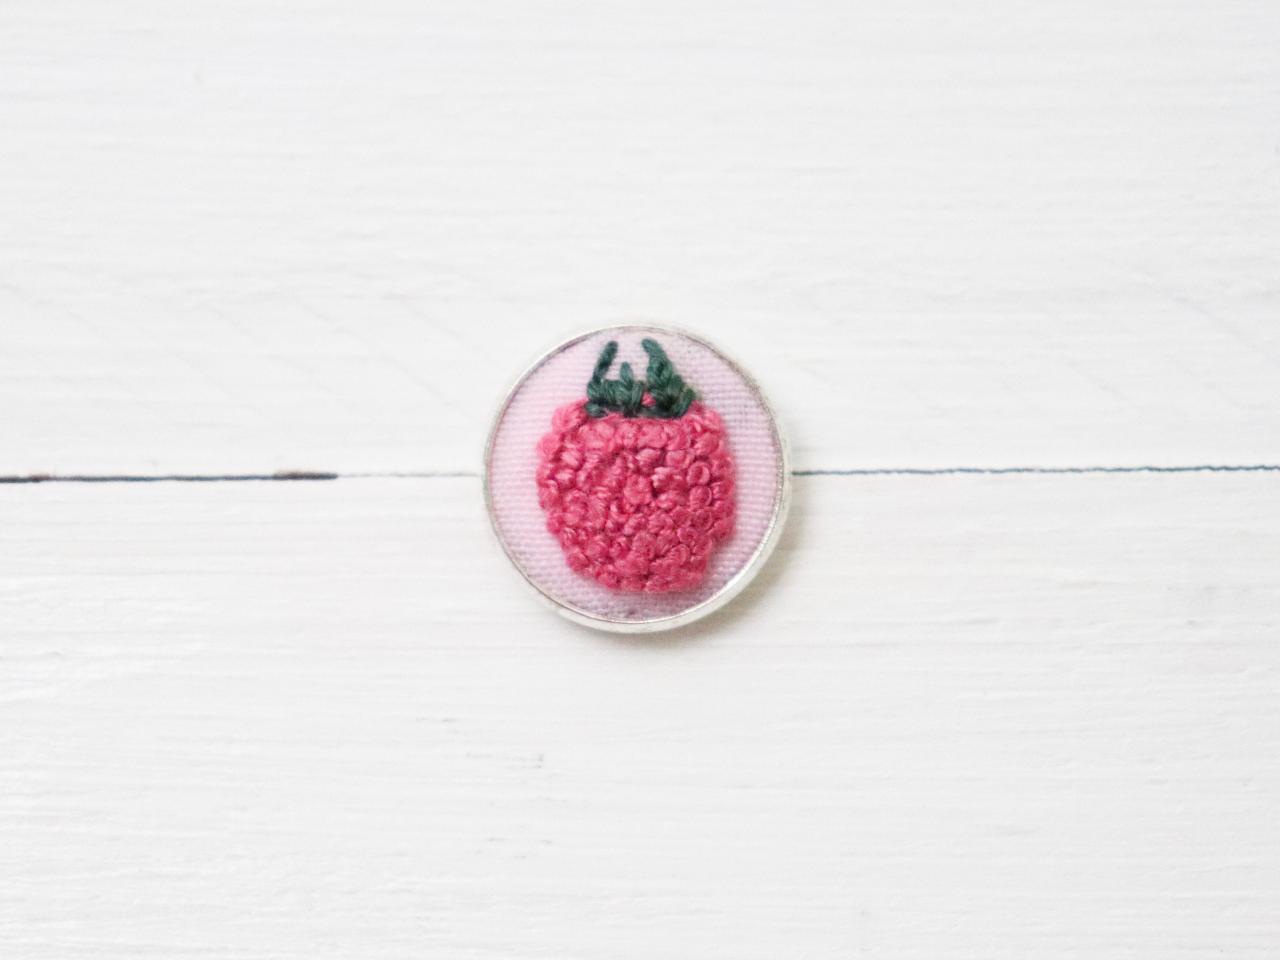 Miniature Embroidery Pin Raspberry Brooch Raspberry Pin Embroidery Pin Hand Embroidery Embroidered Pin Raspberry Collar Pin Berry Pin